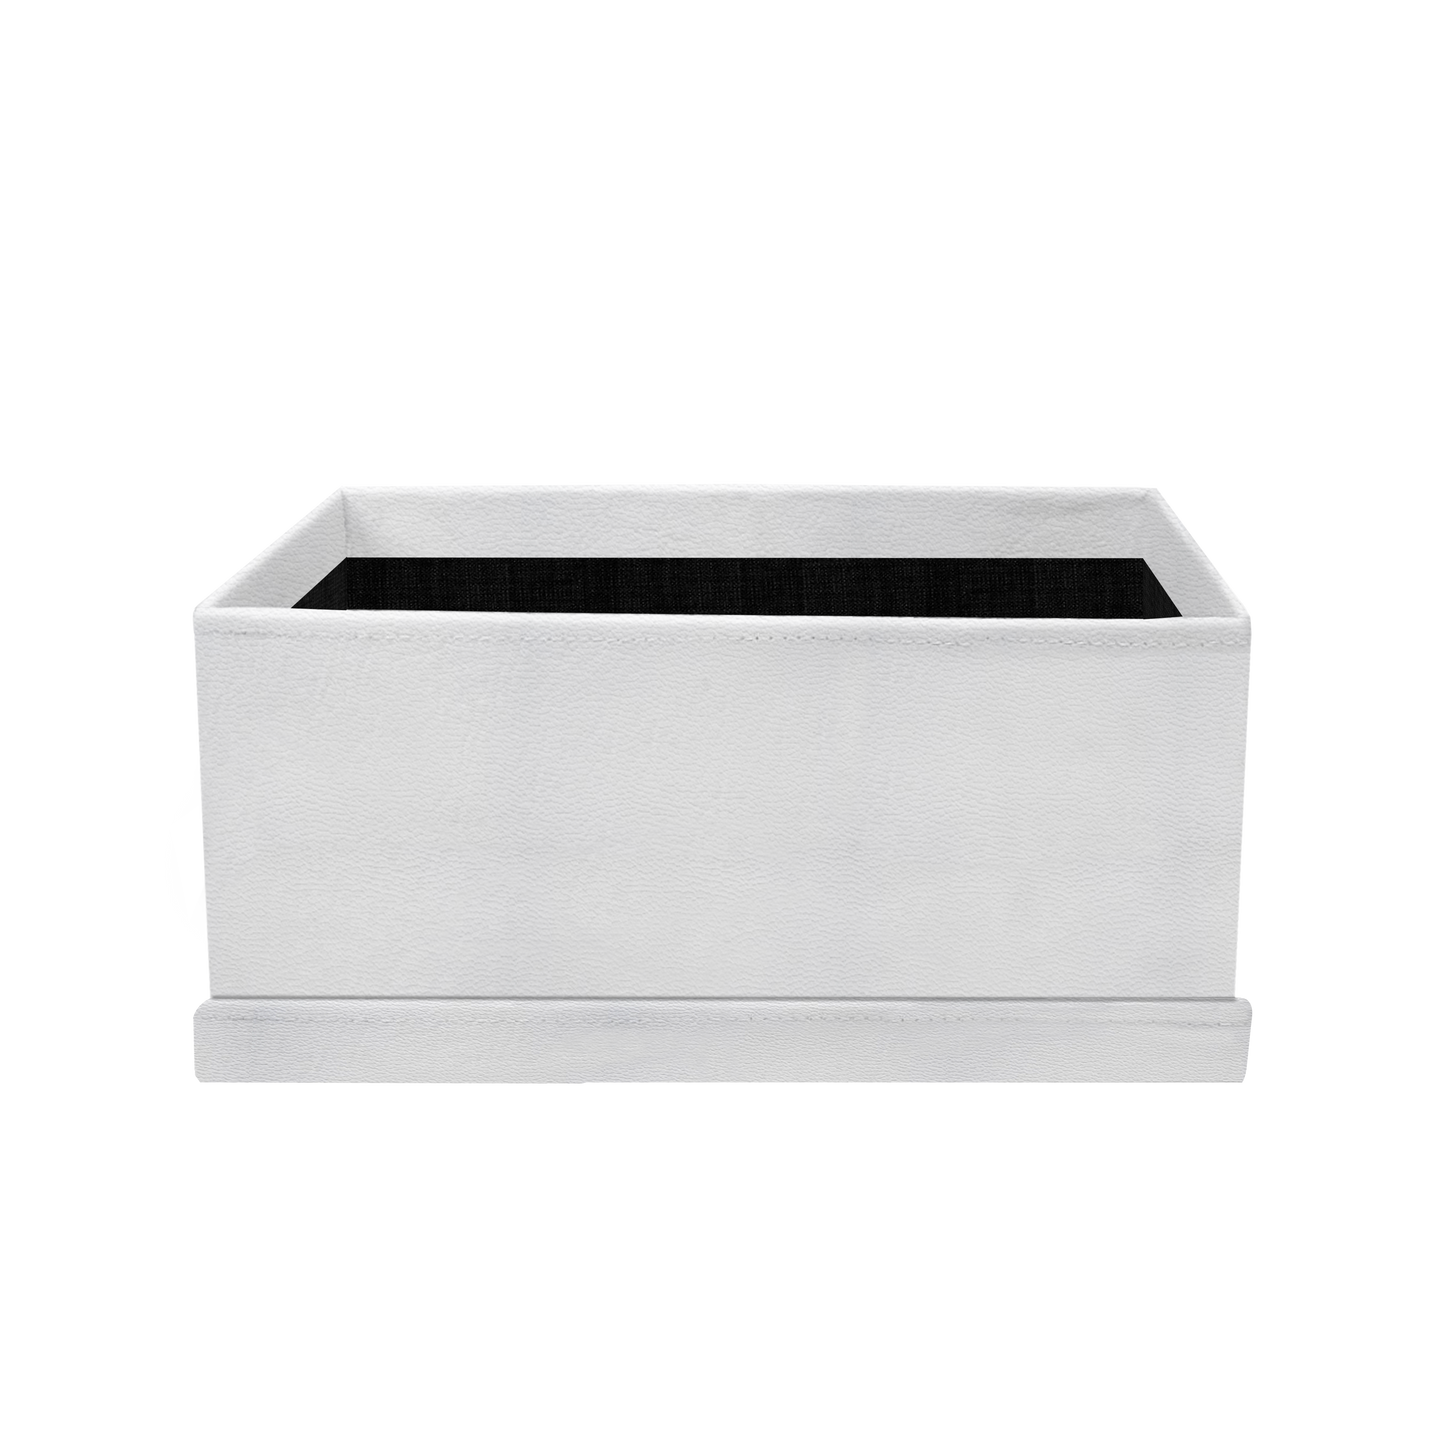 Kit 3 different sizes rectangular shape boxes 3 in 1 - PU Leather White